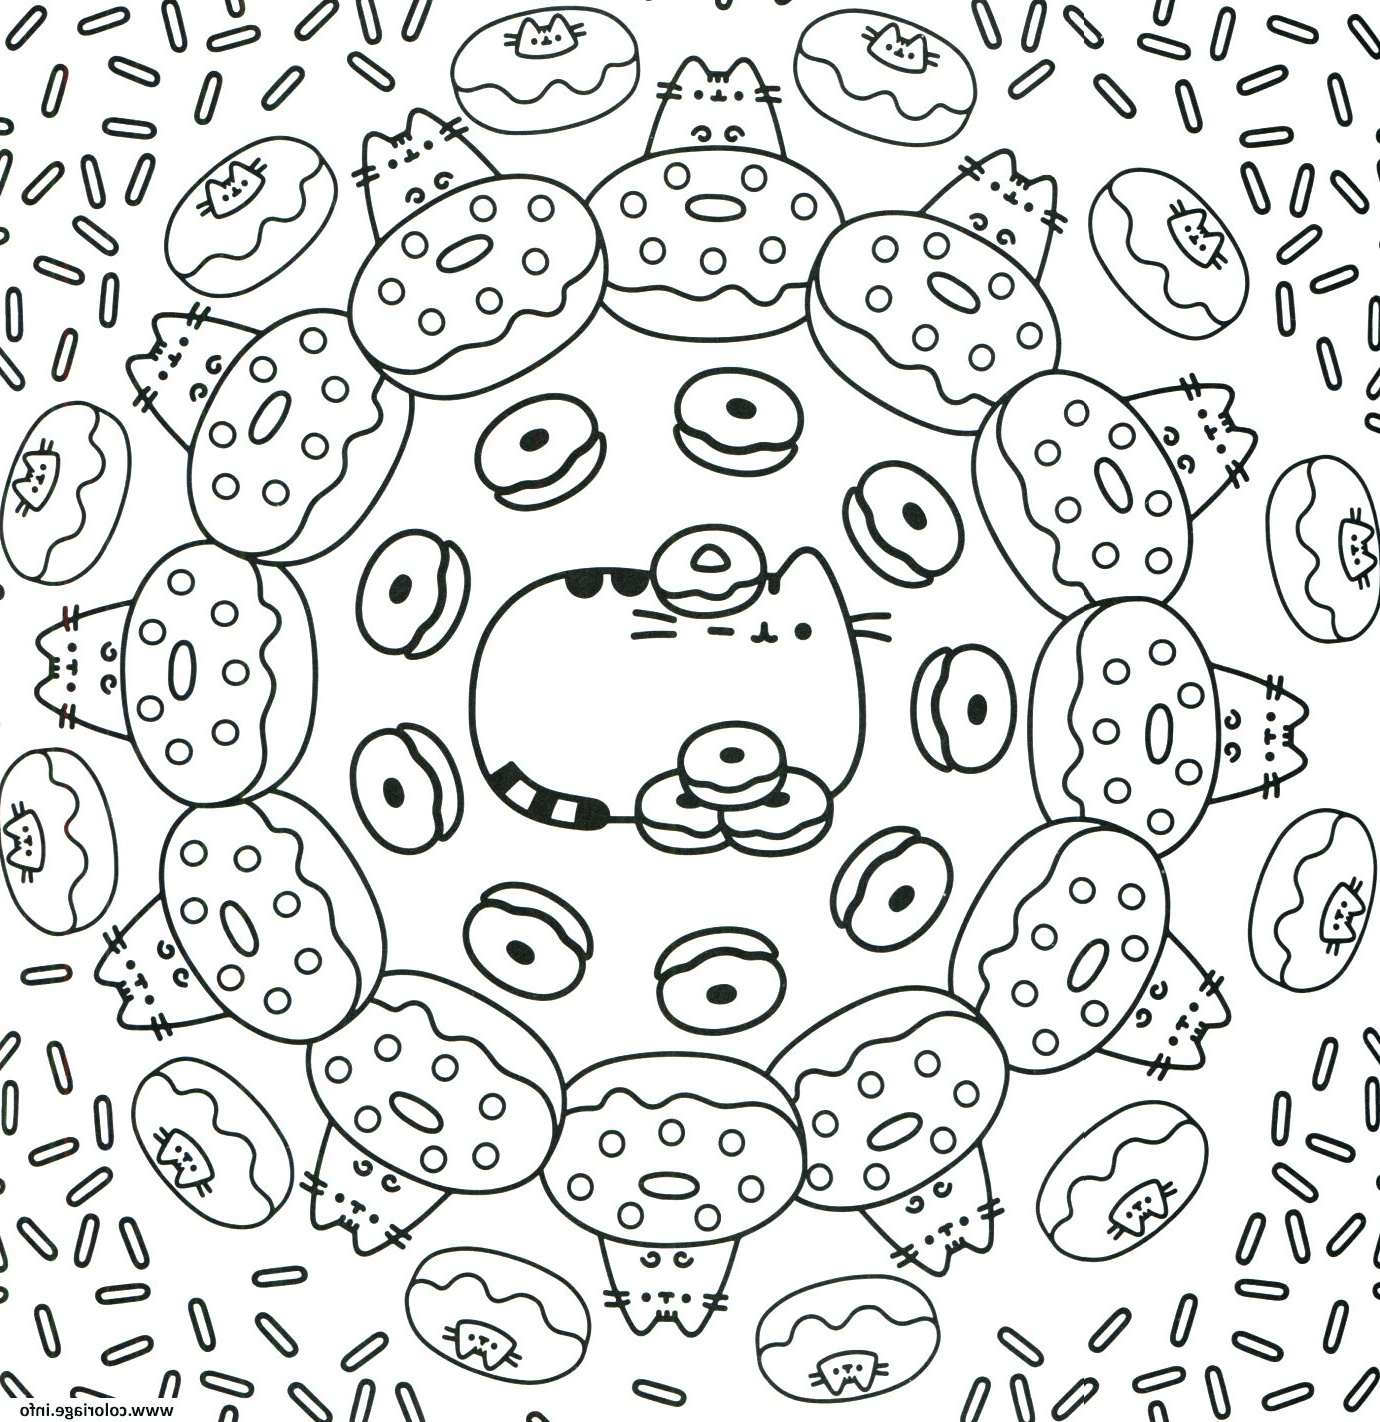 Coloriage De Donuts Beau Collection Coloriage Pusheen the Cat Donuts Pattern Jecolorie